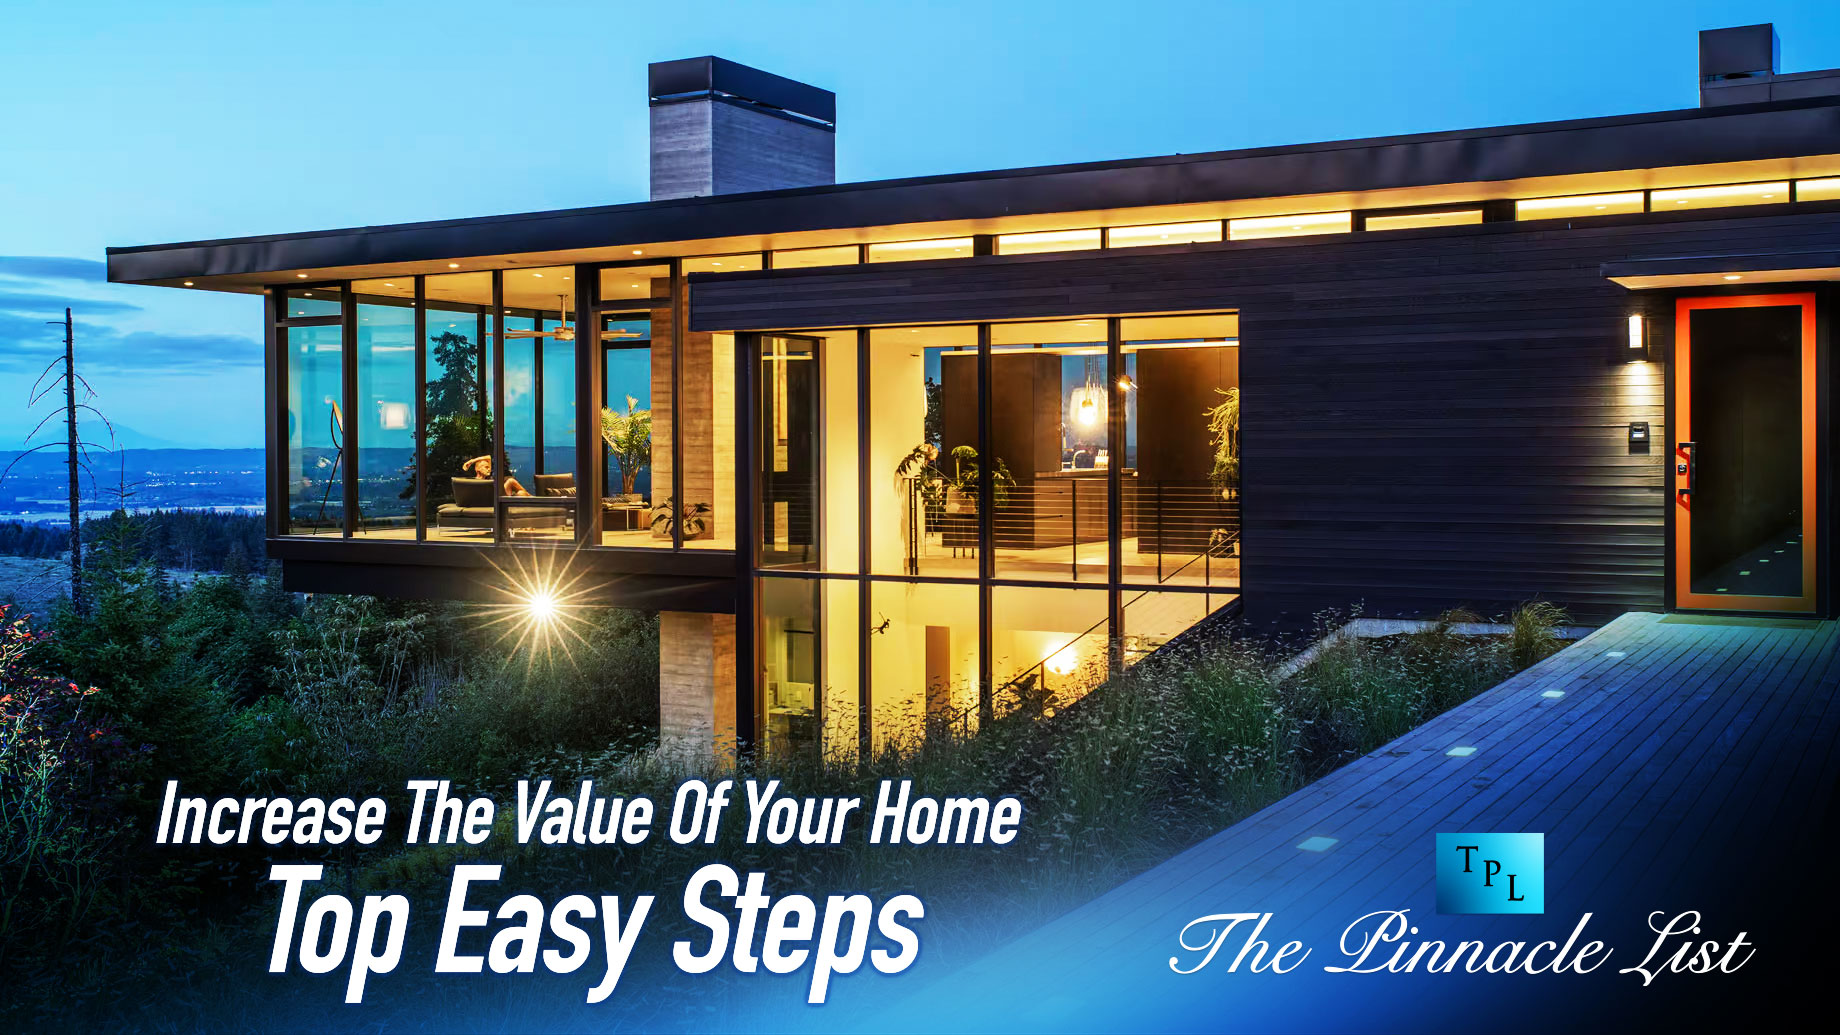 Increase The Value Of Your Home - Top Easy Steps